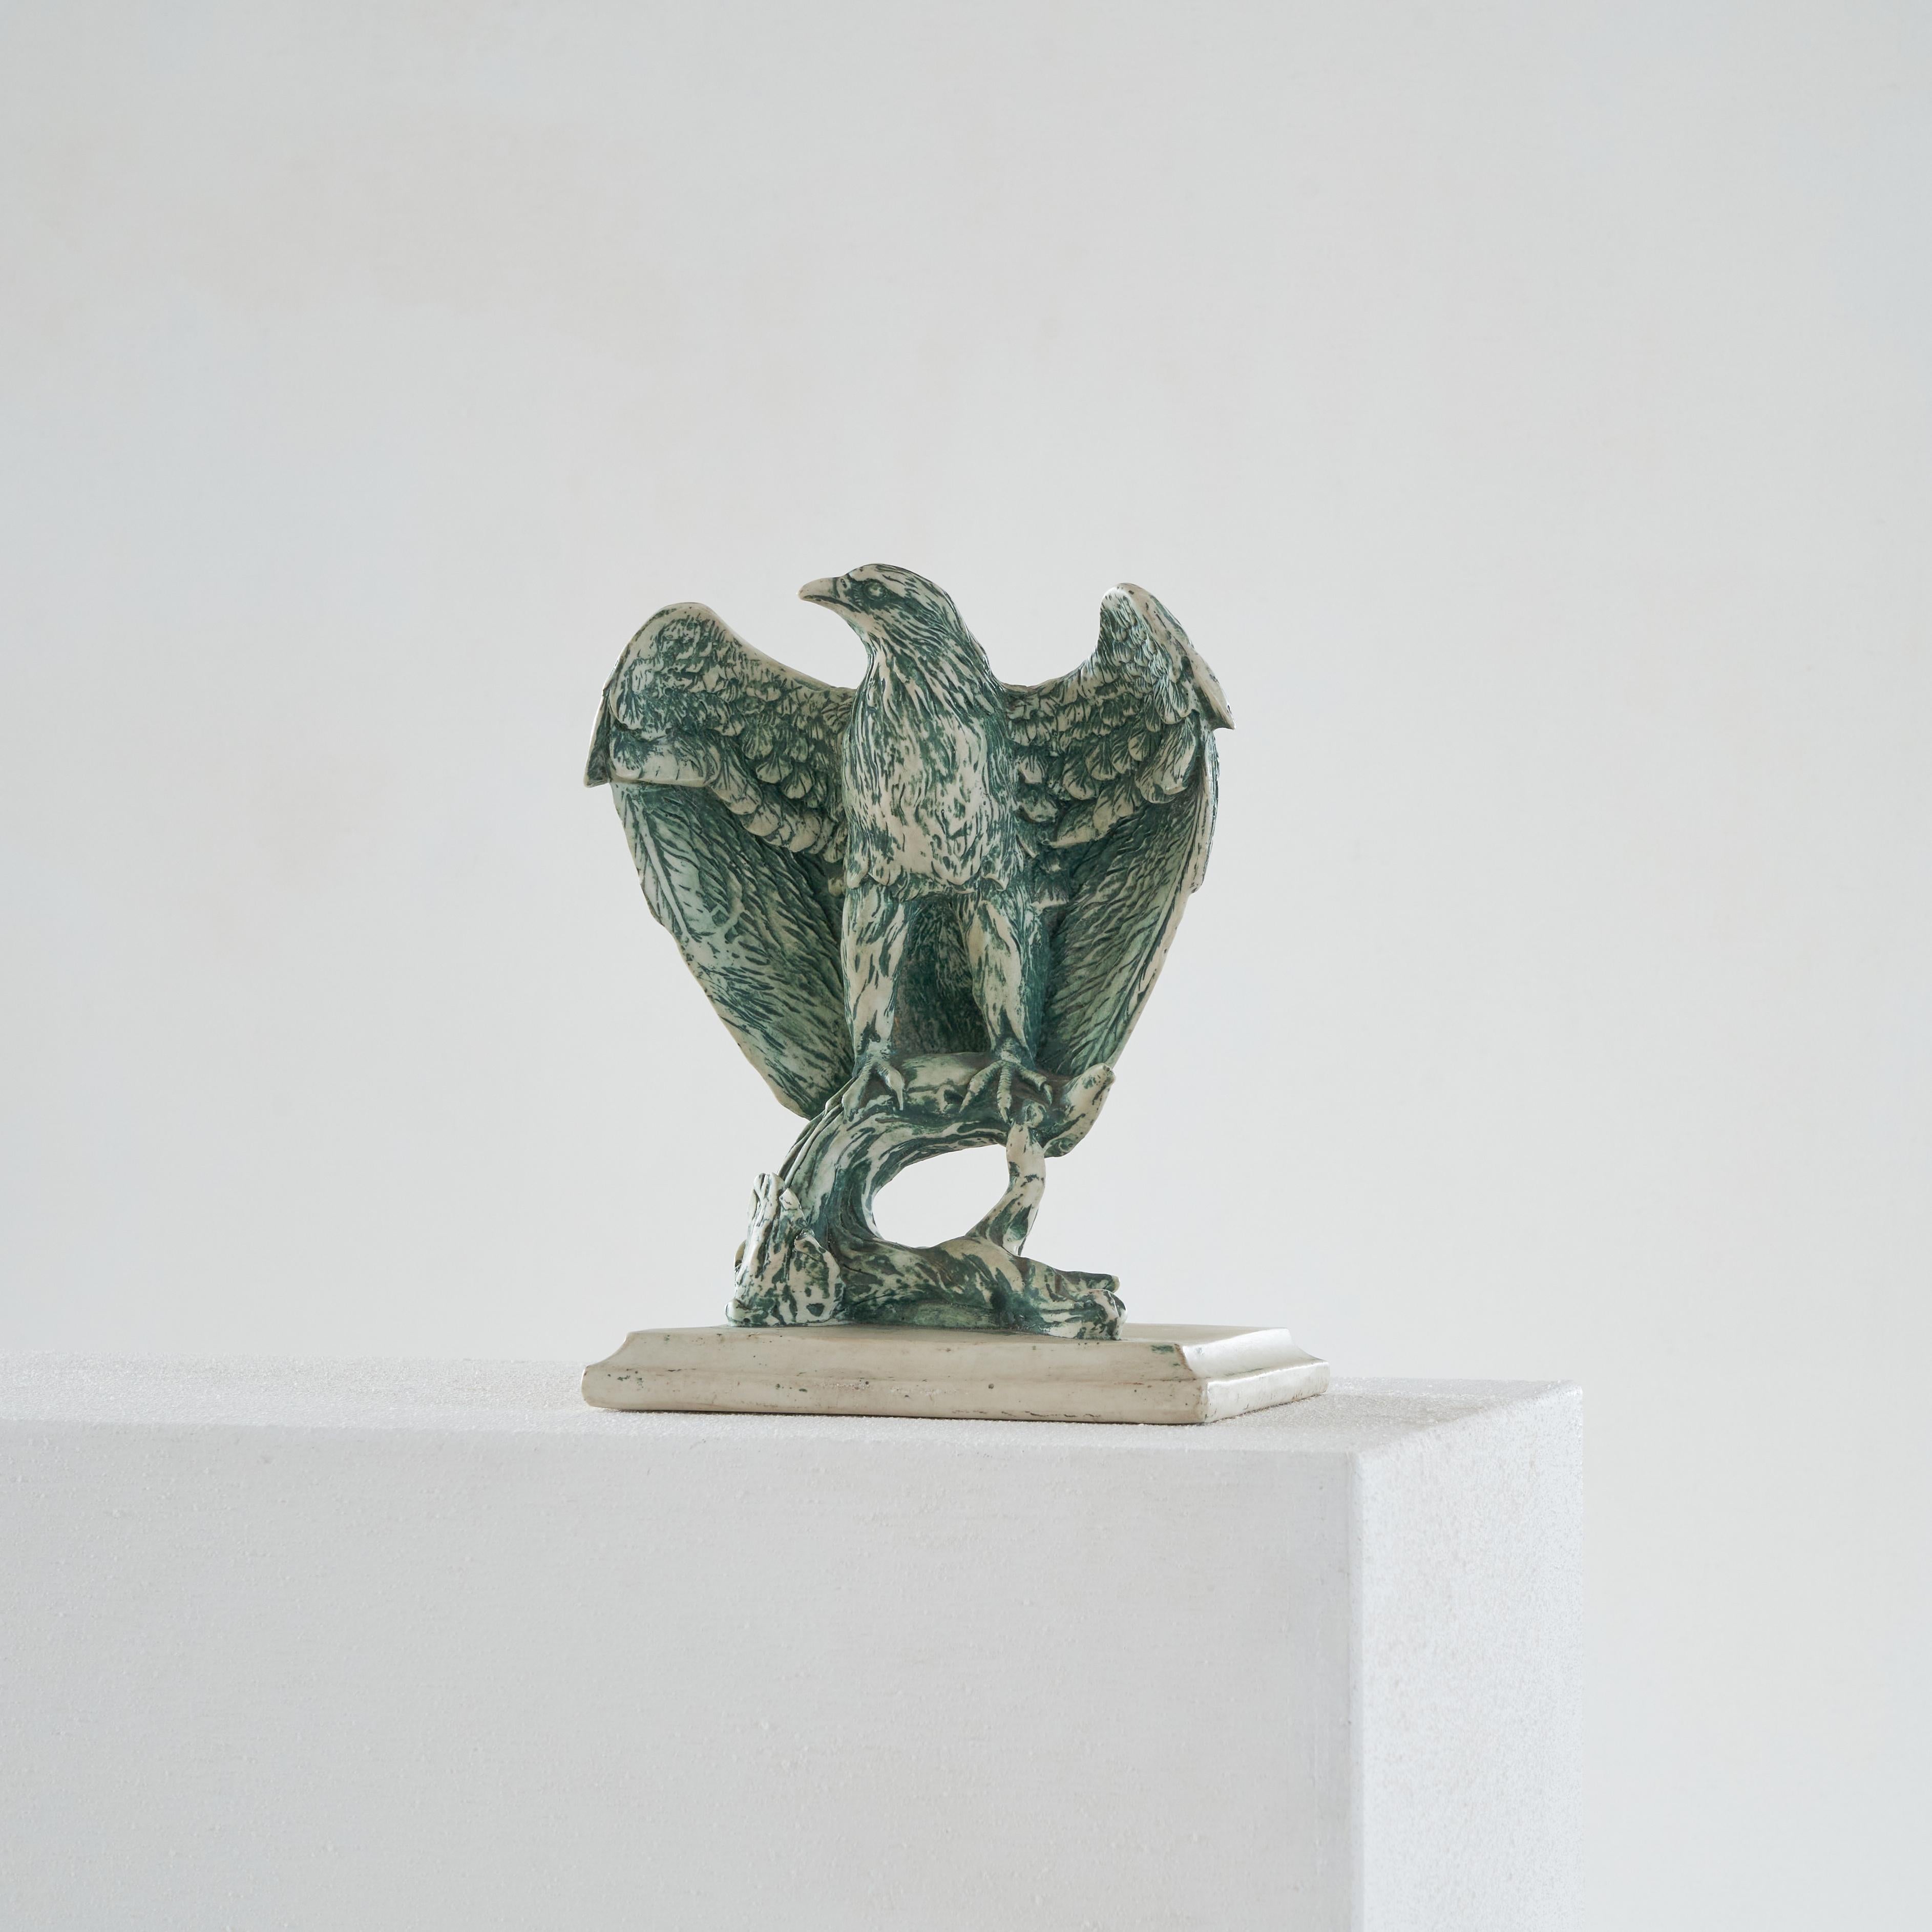 Ceramic Eagle Sculpture, 20th century. 

Wonderful and beautifully made sculpture of an eagle. Well made, great proportions and nice details like the green glaze and the delicate feathers. 

It depicts an eagle sitting on a branch and spreading